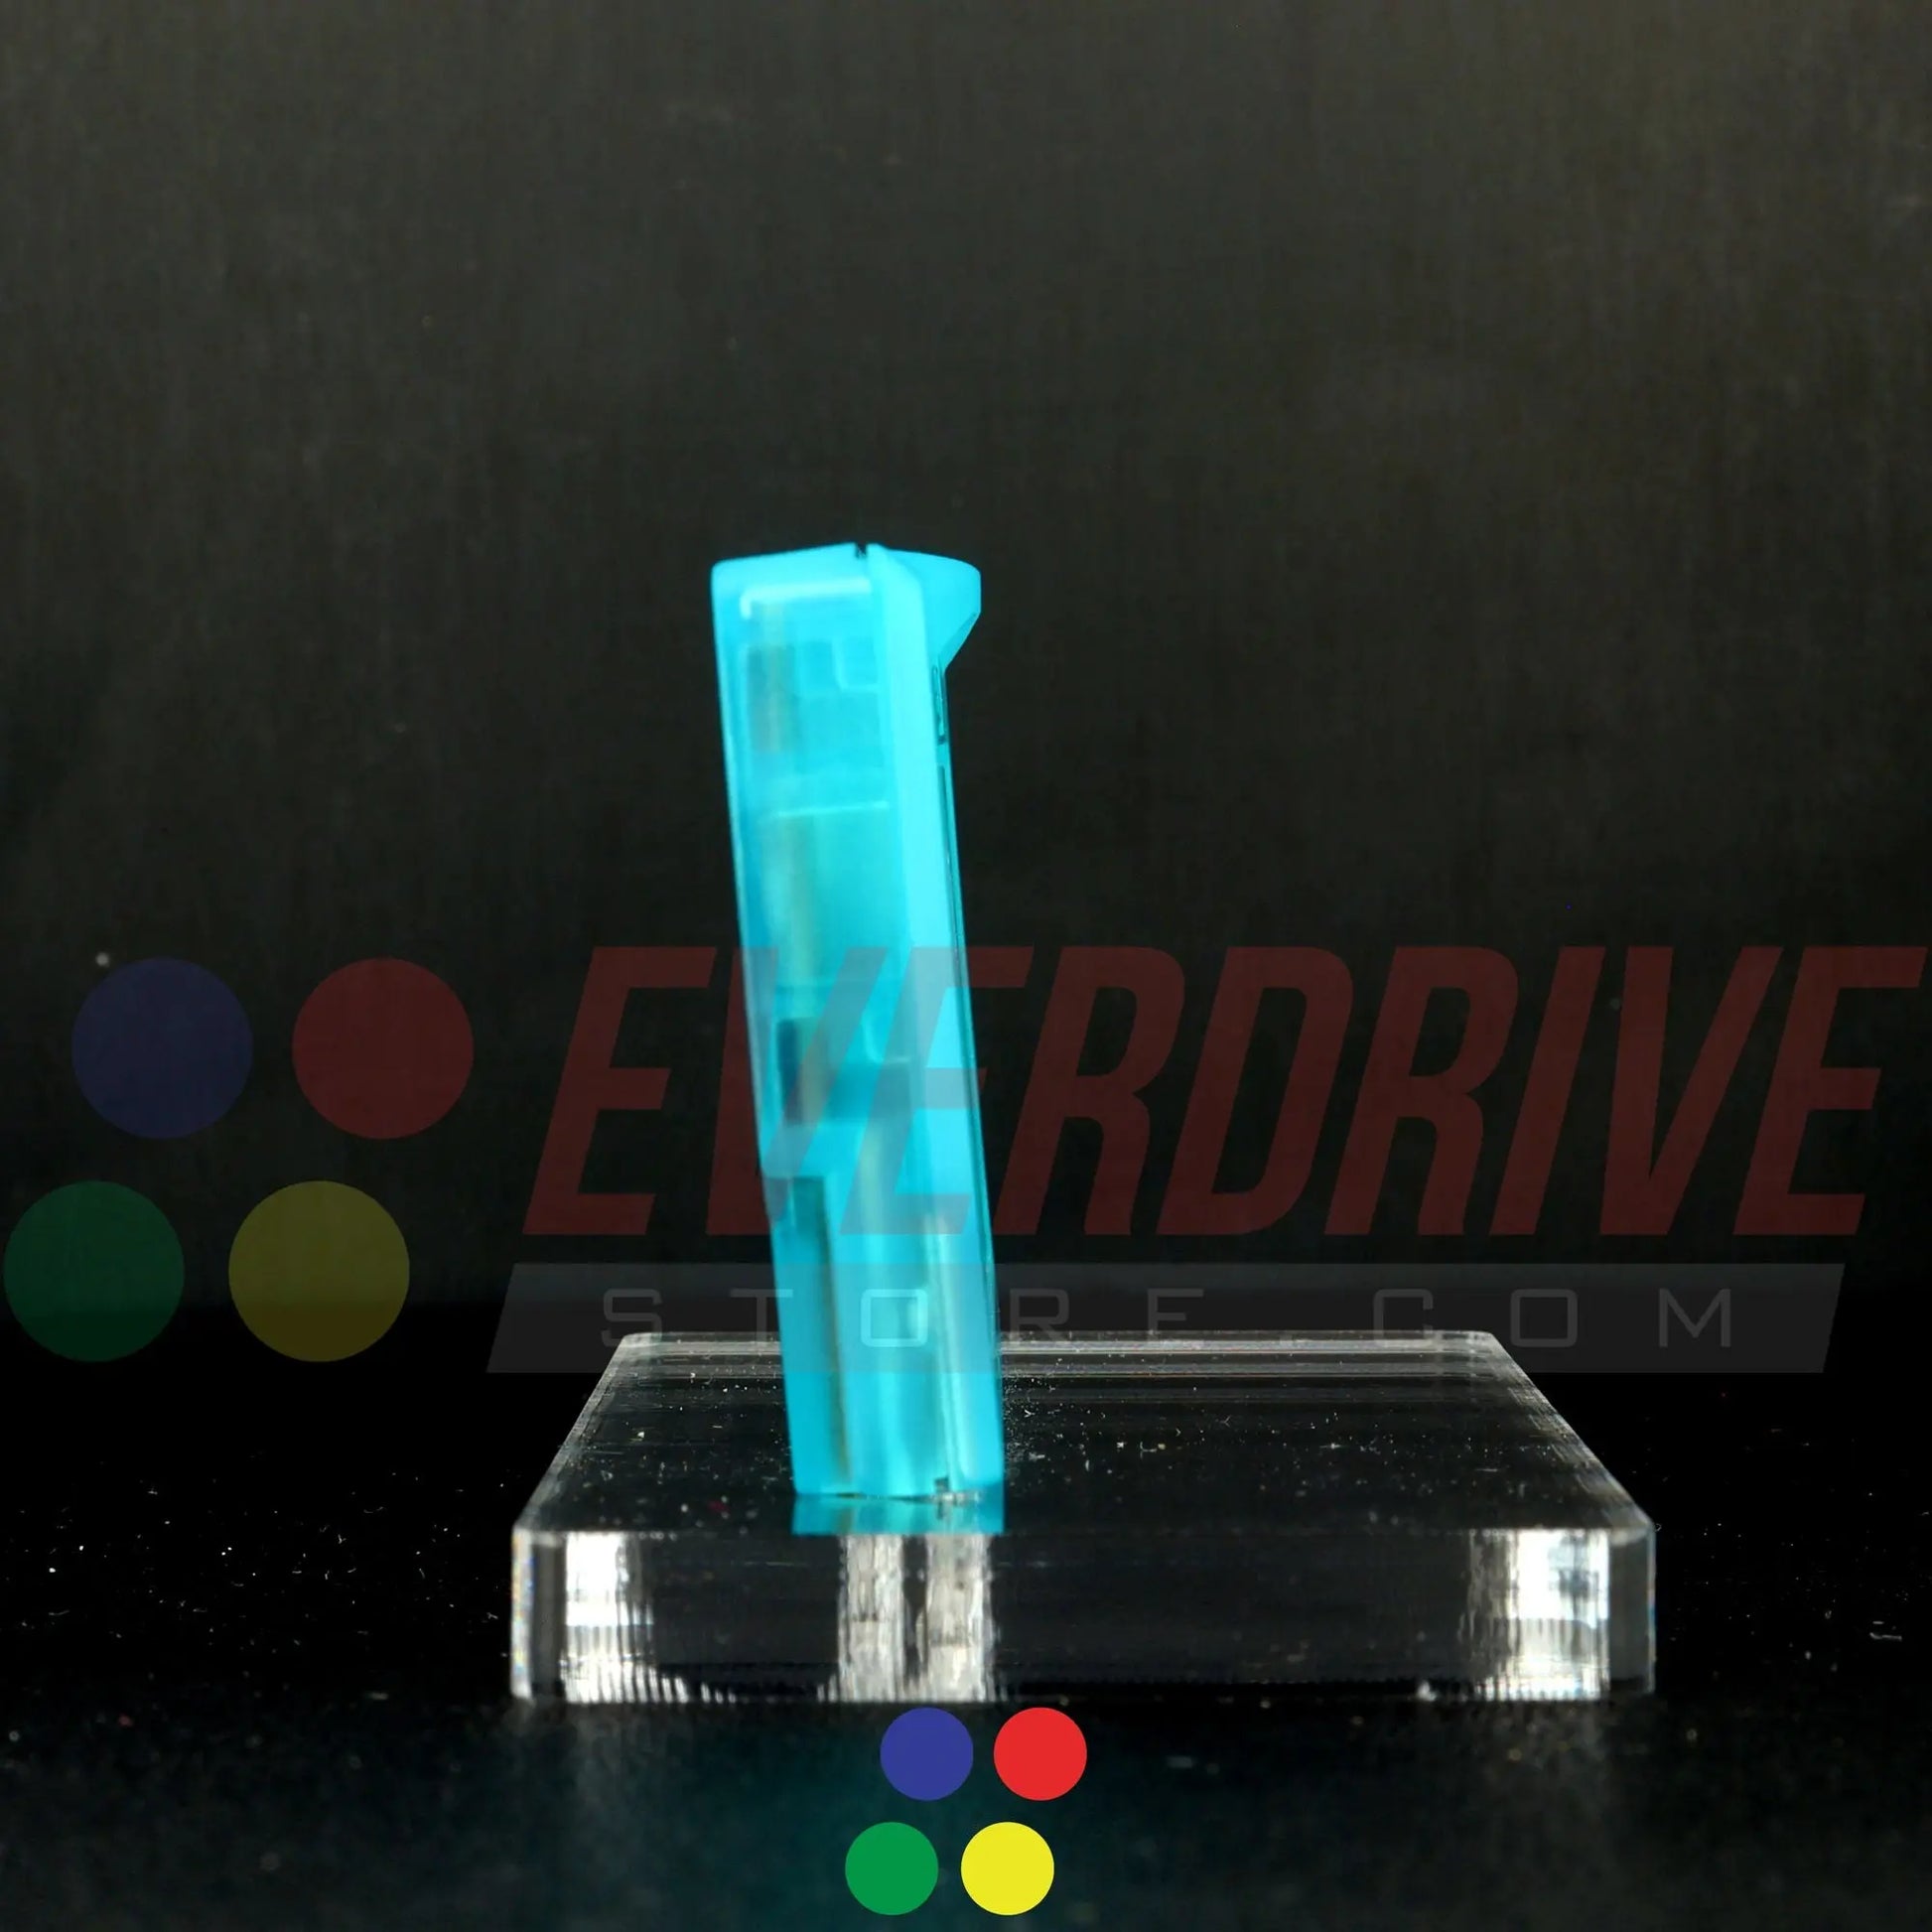 Everdrive GBA Mini - Frosted Turquoise Krikzz